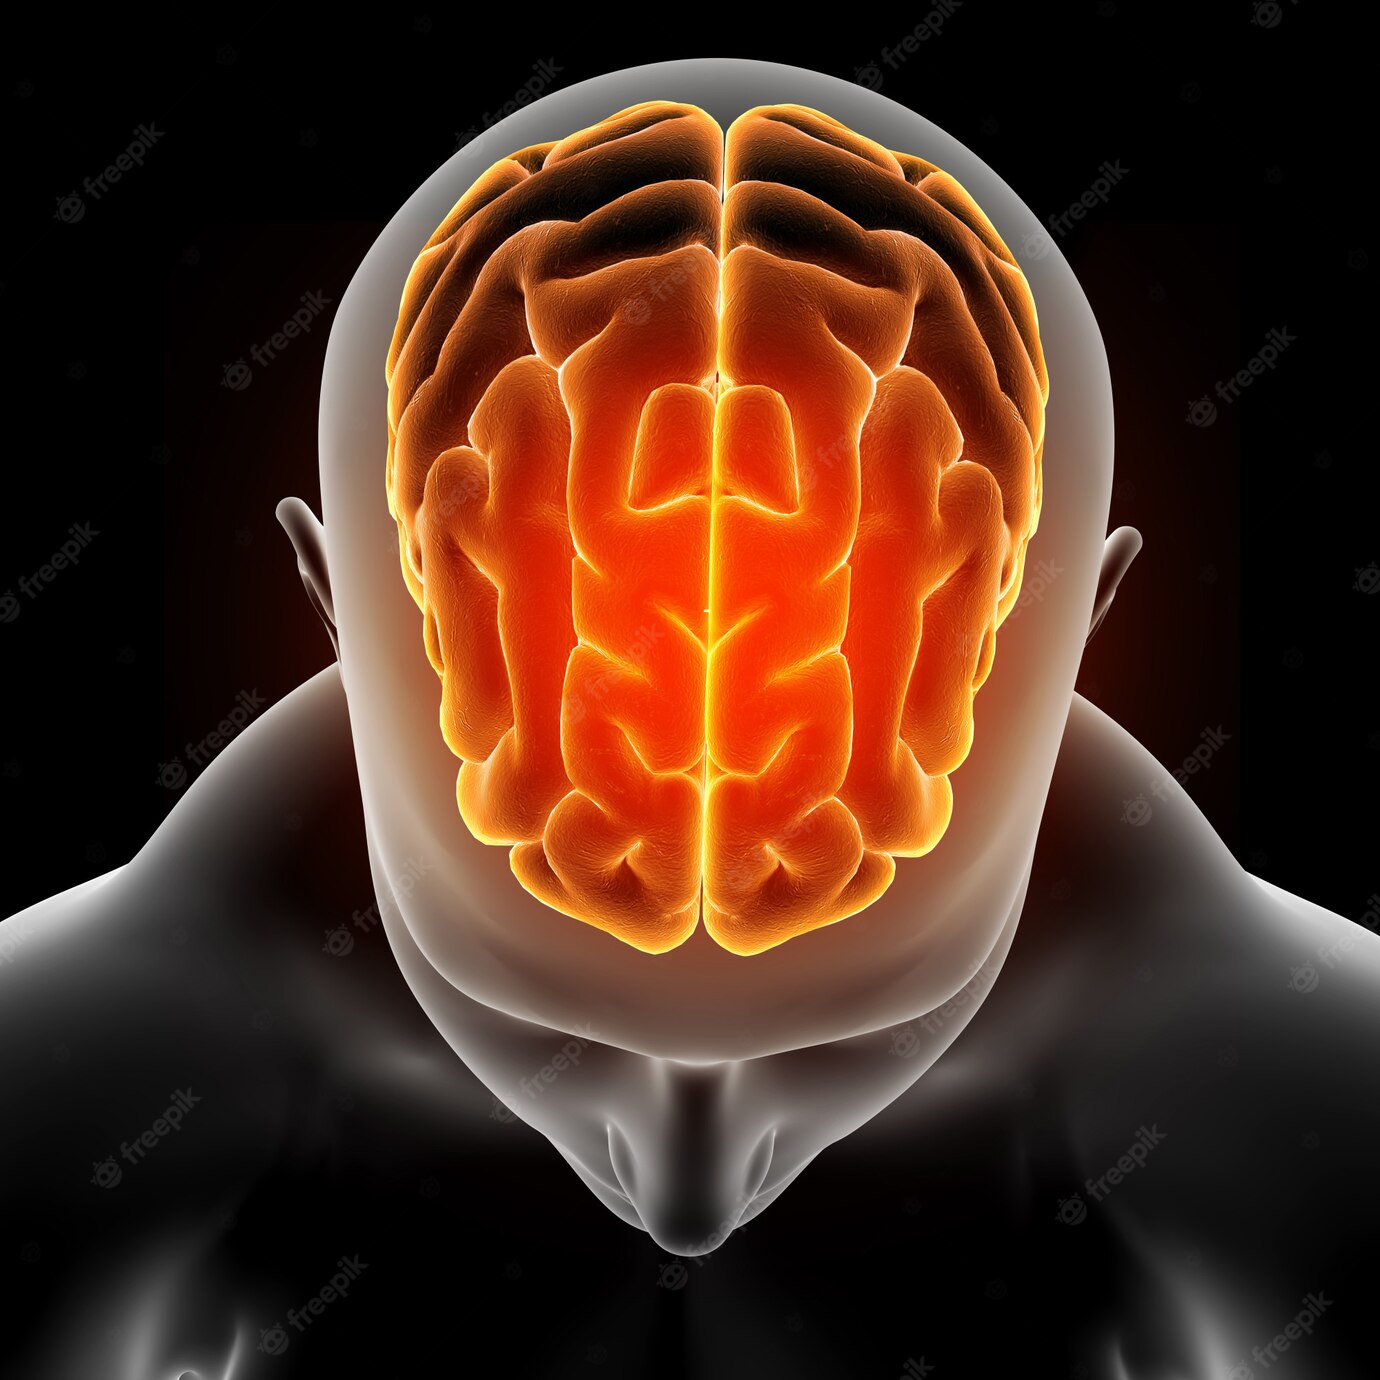 3d Medical Image Showing Male Figure With Brain Highlighted 1048 10173